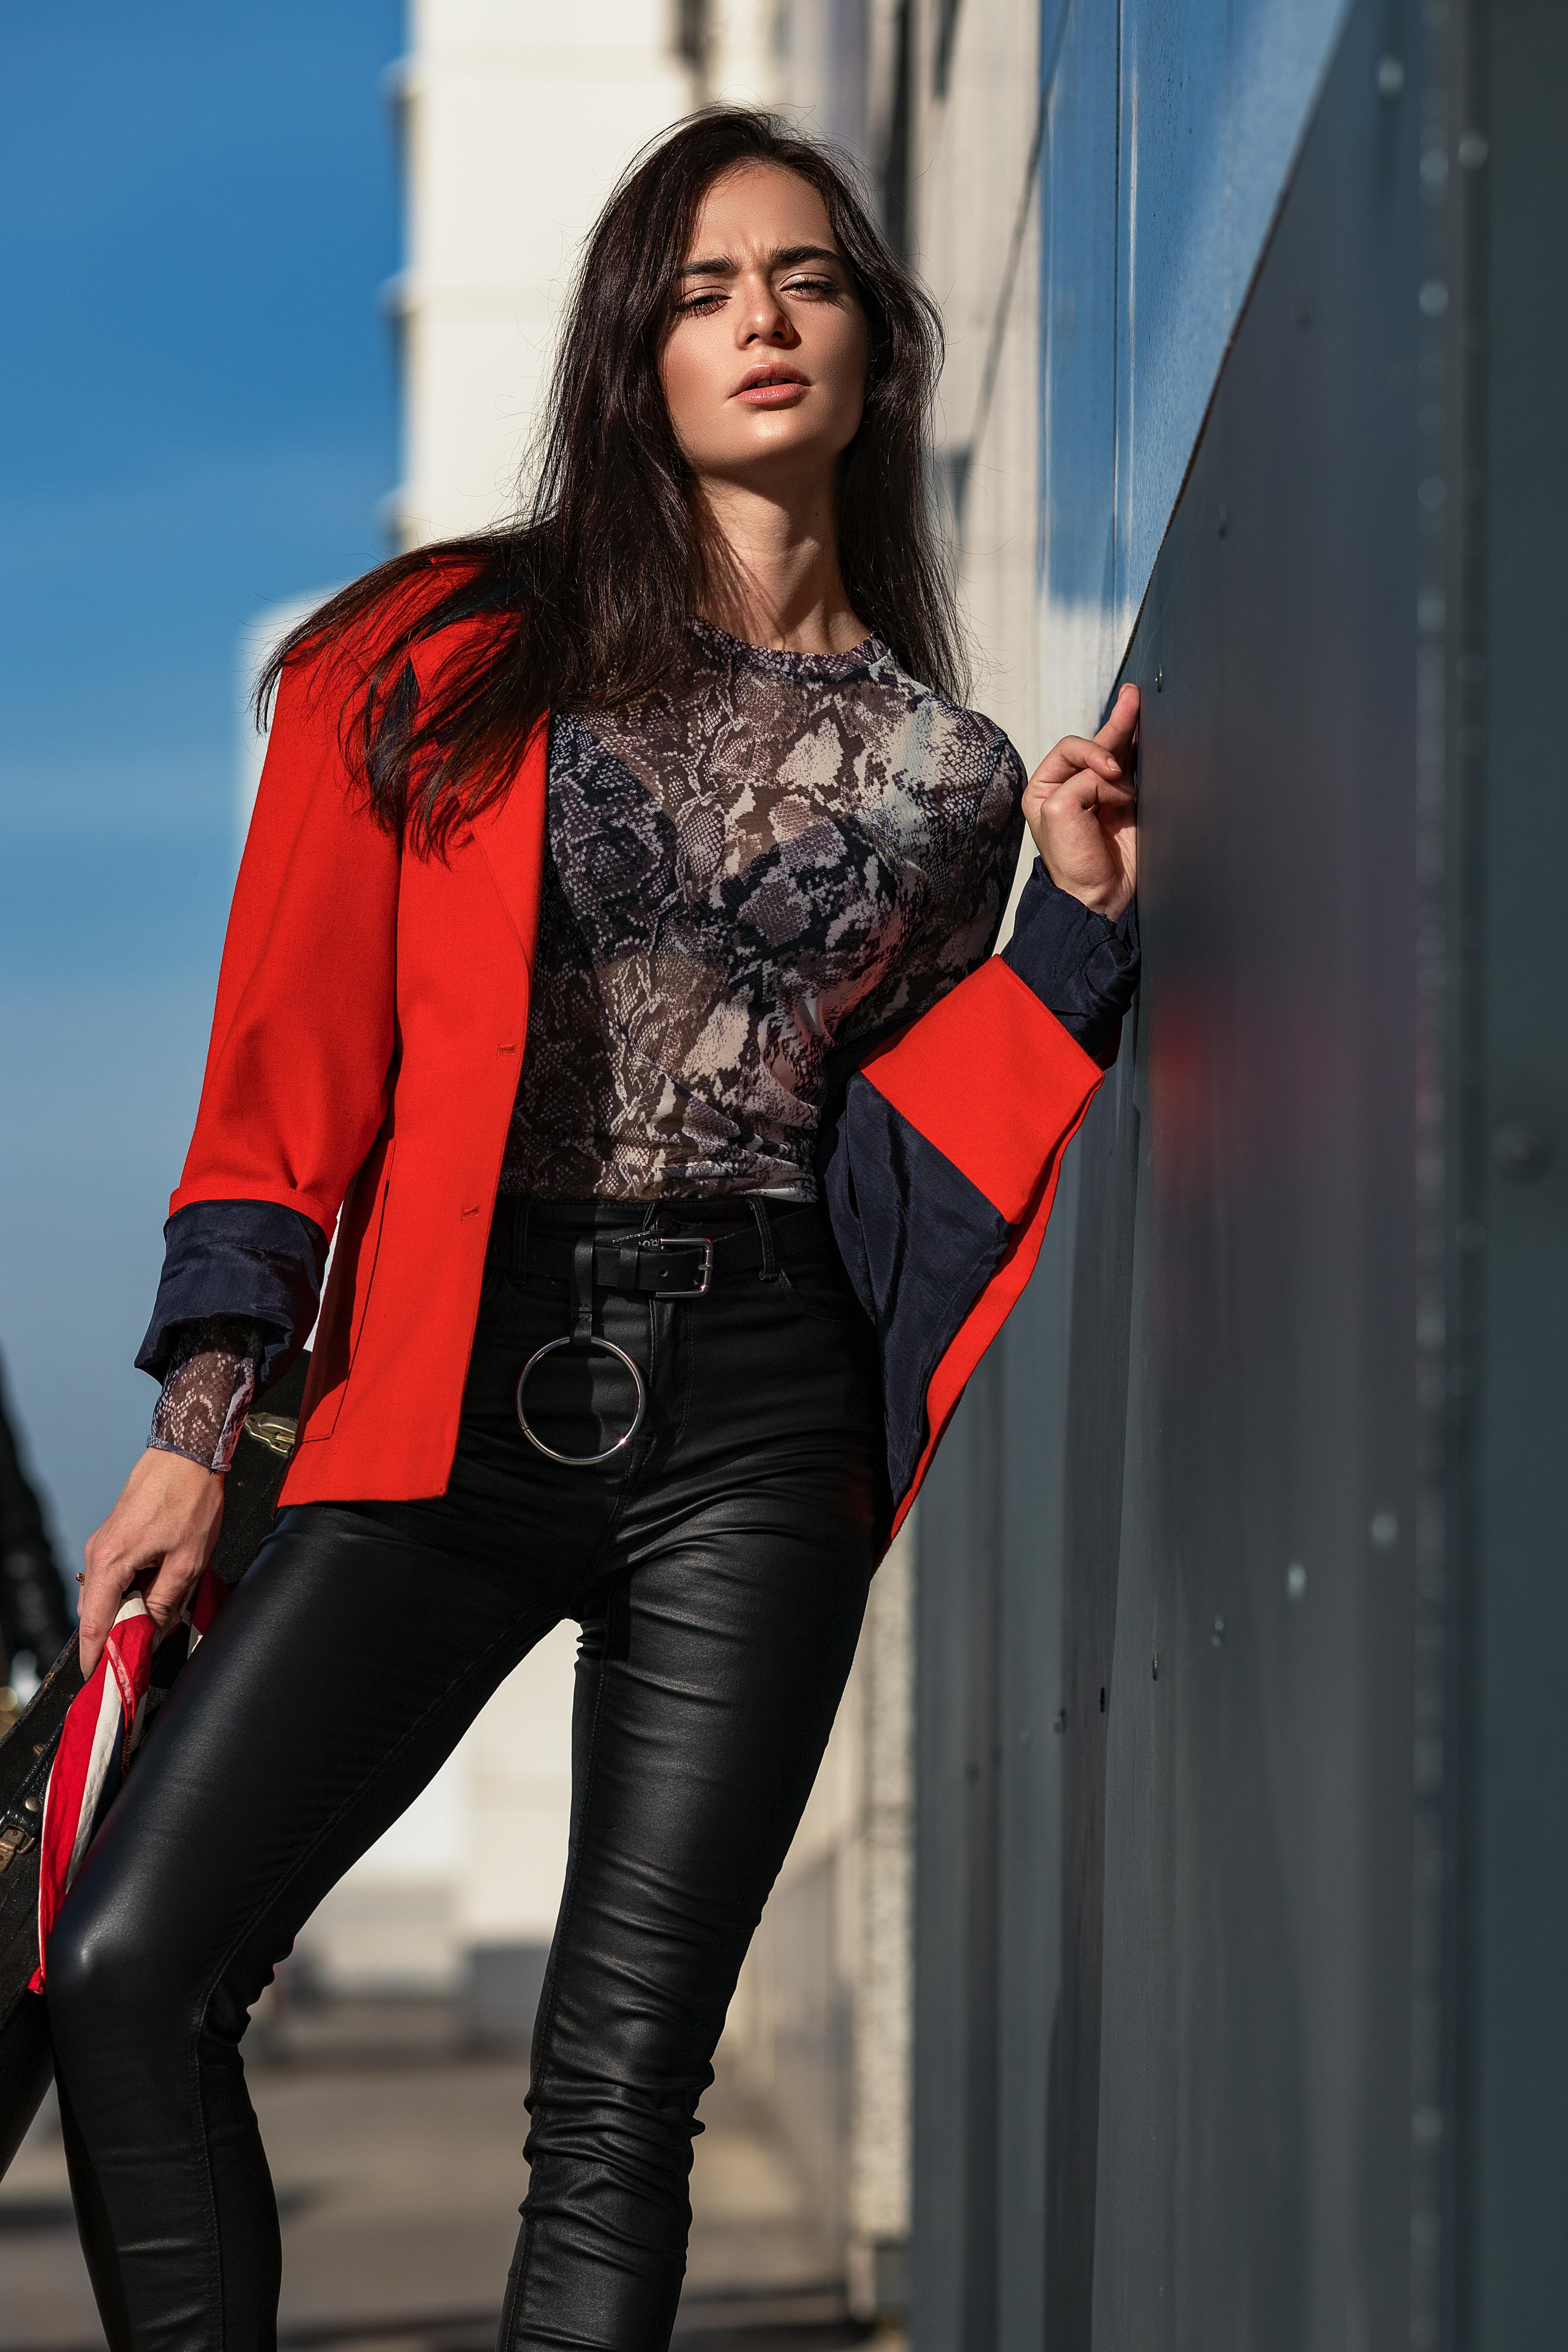 Low Angle View of a Woman in Leather Trousers and Red Leaning against a · Free Stock Photo